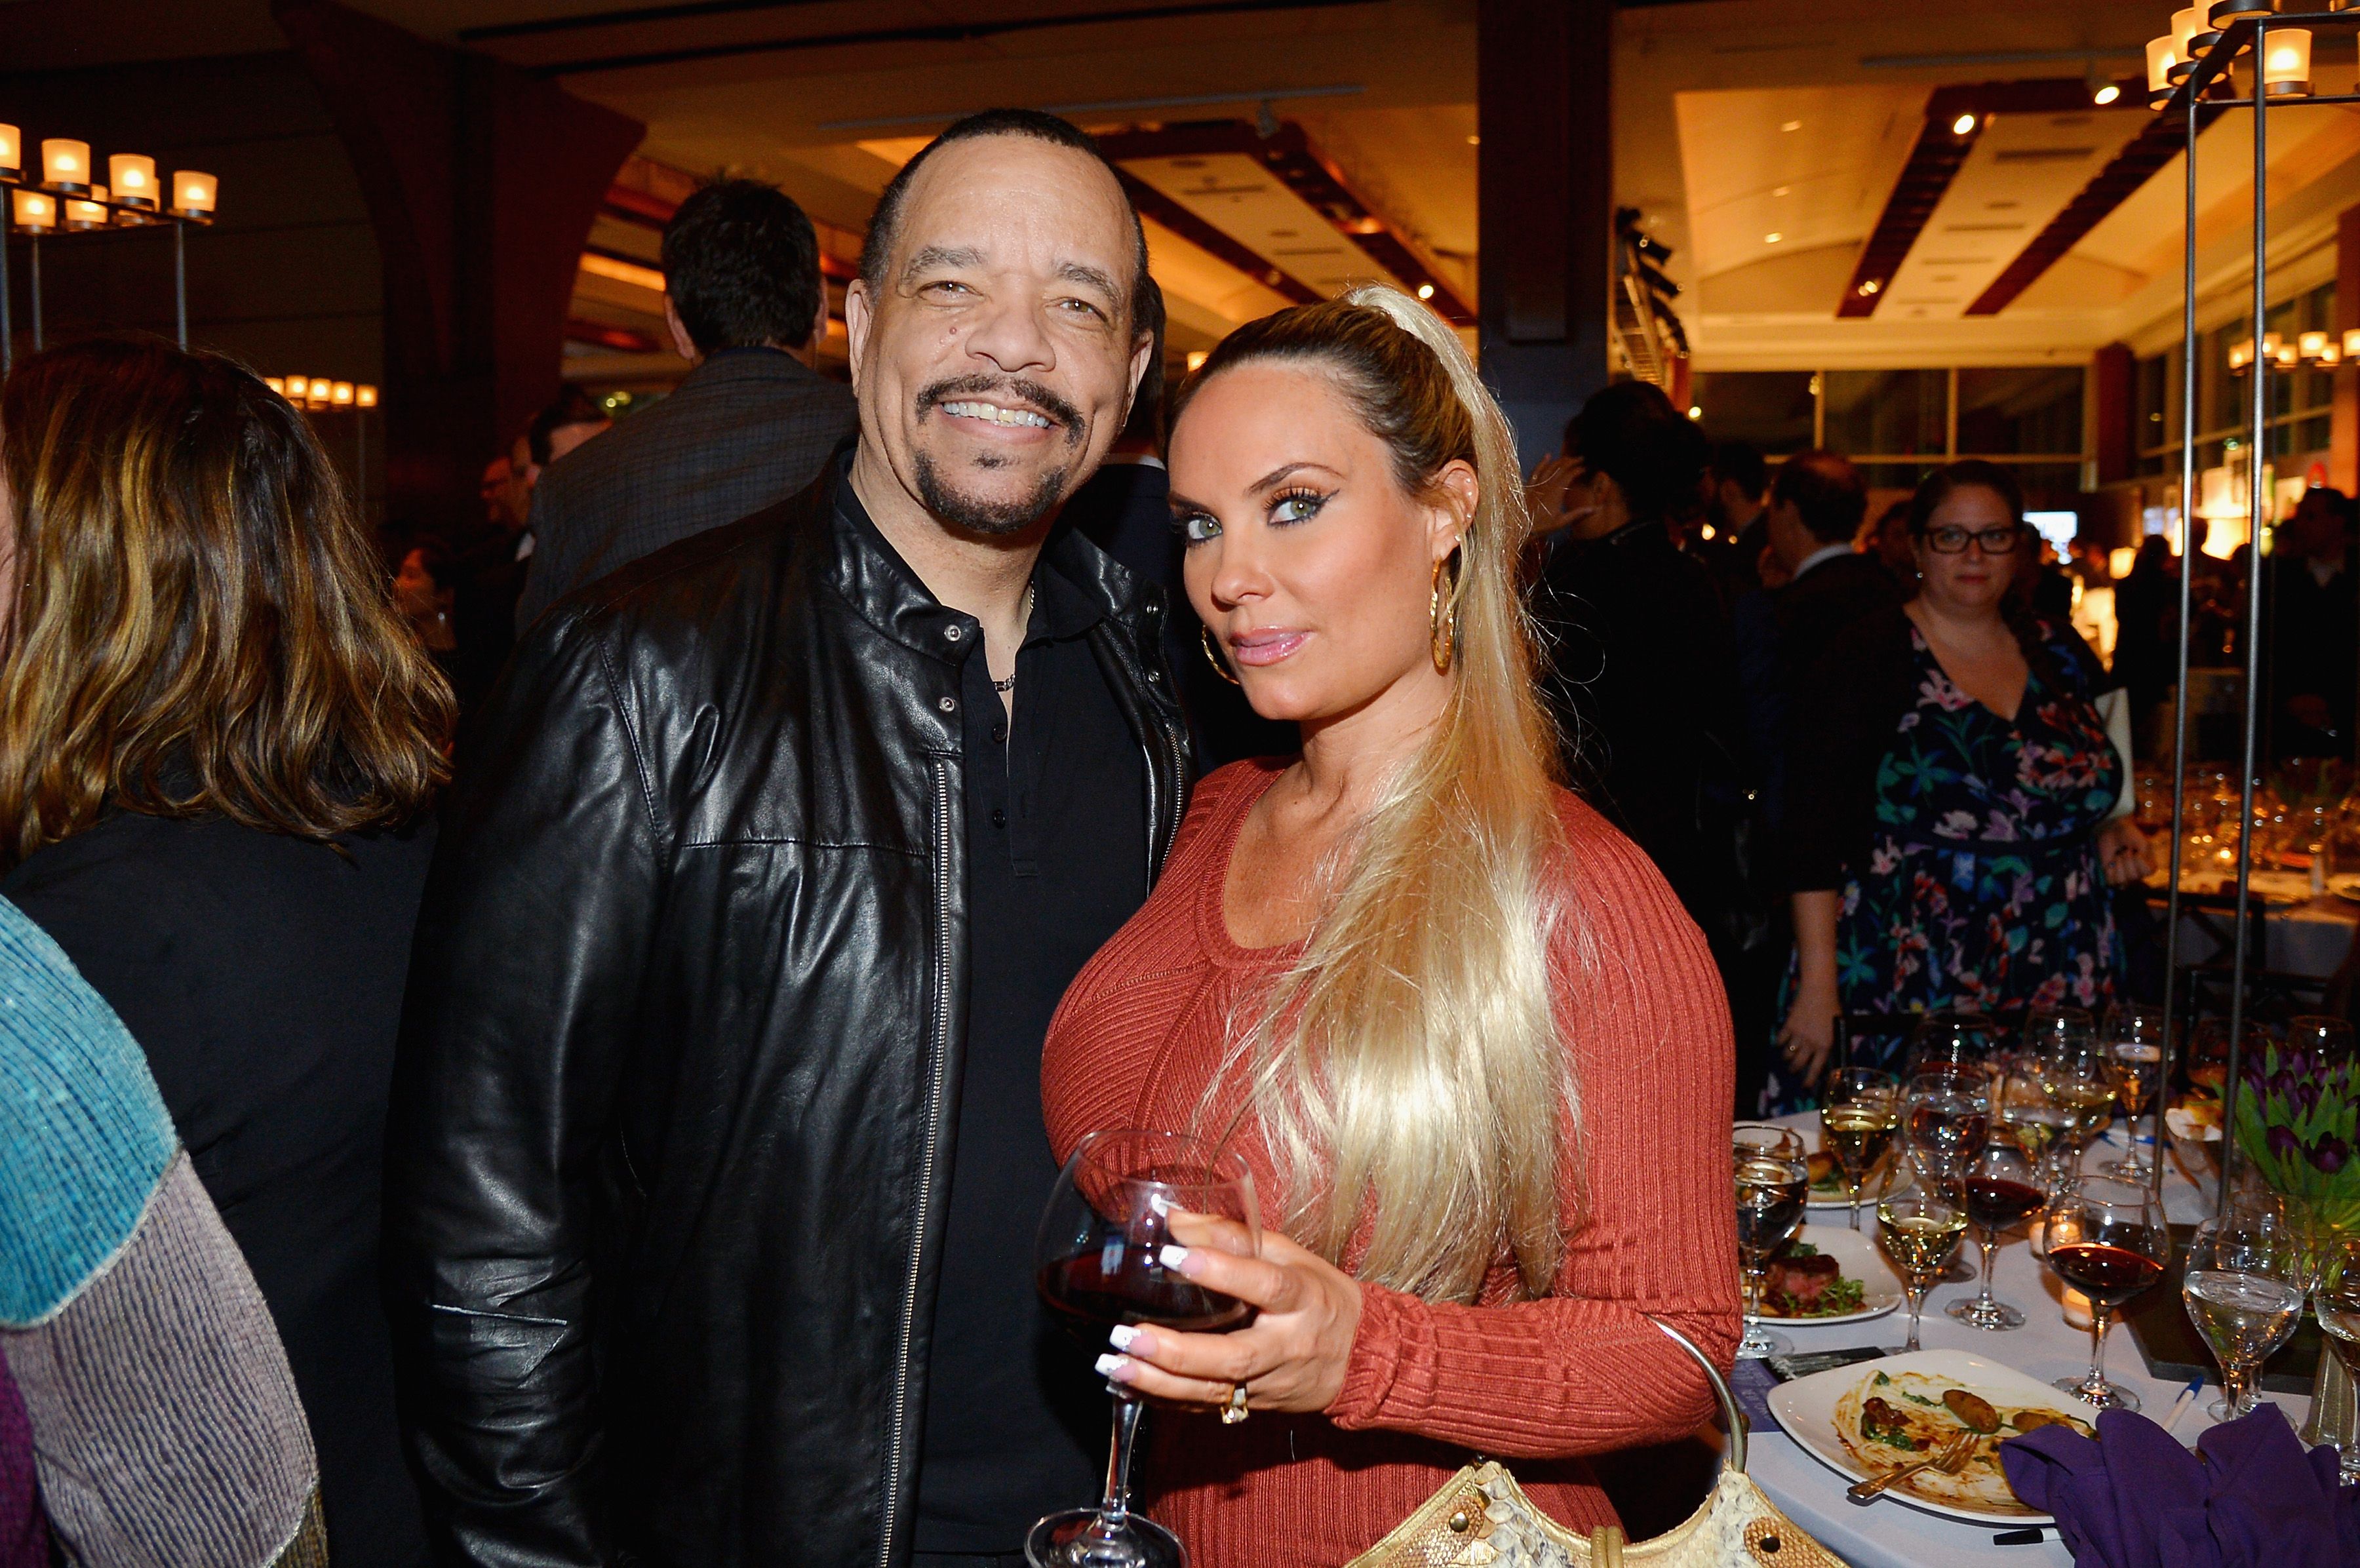 Ice-T and Coco Austin at the Bailey House Gala & Auction event in New York City in 2017. | Photo: Getty Images